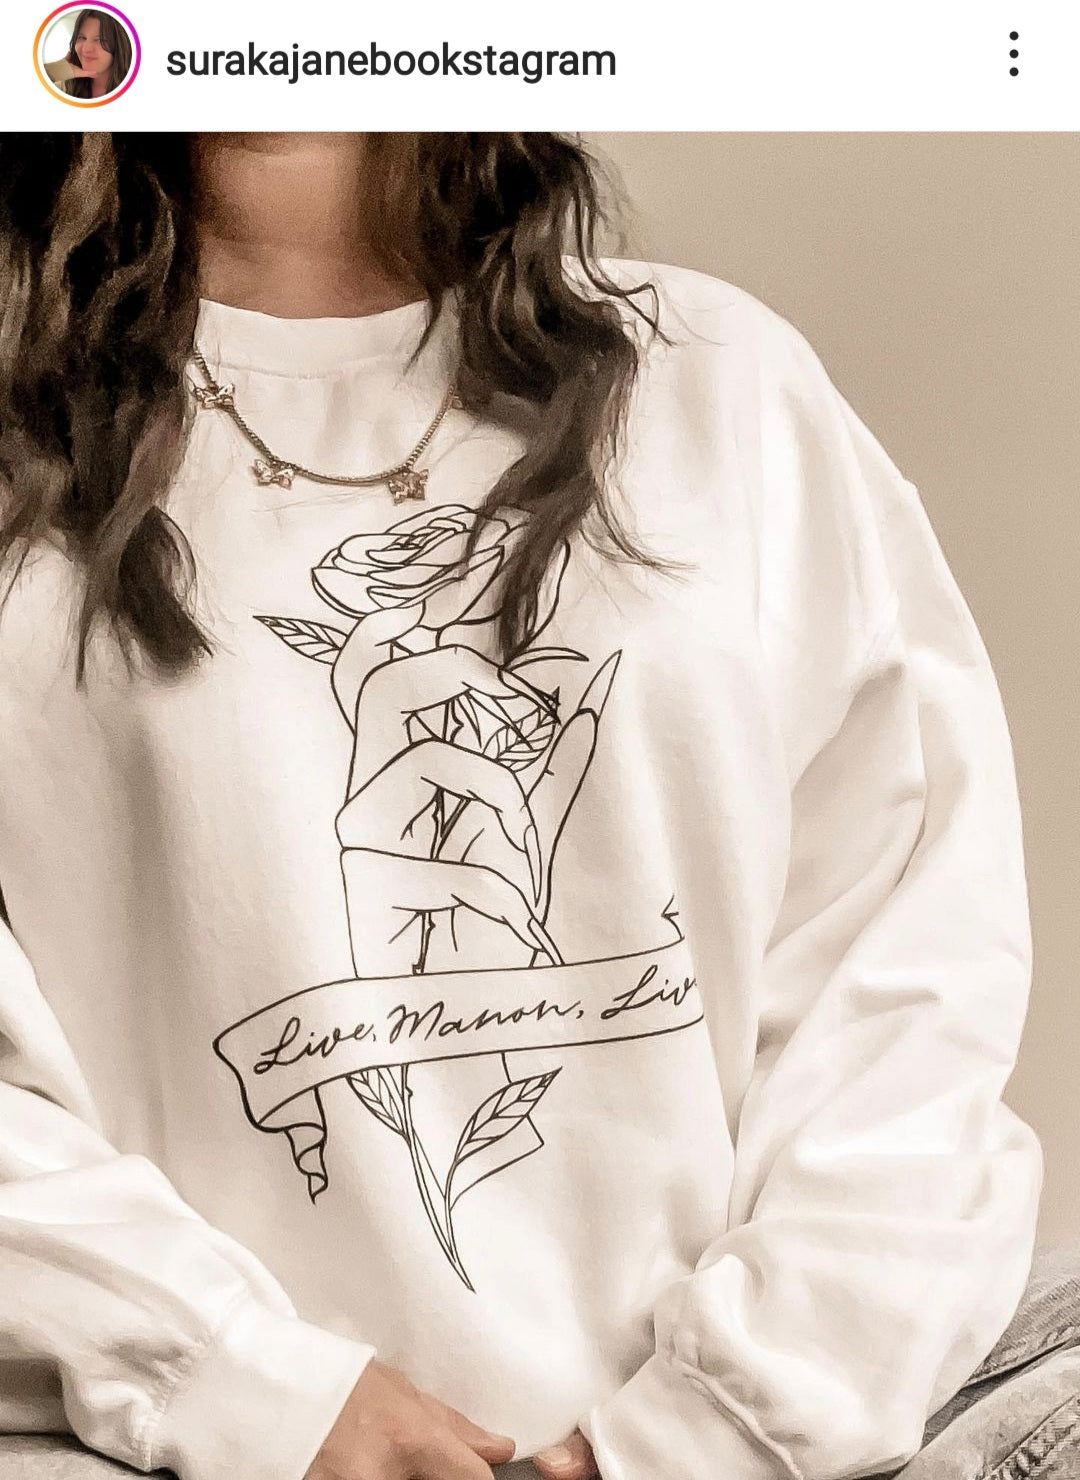 Throne of glass "Live, Manon, Live" officially licensed crewneck sweatshirt